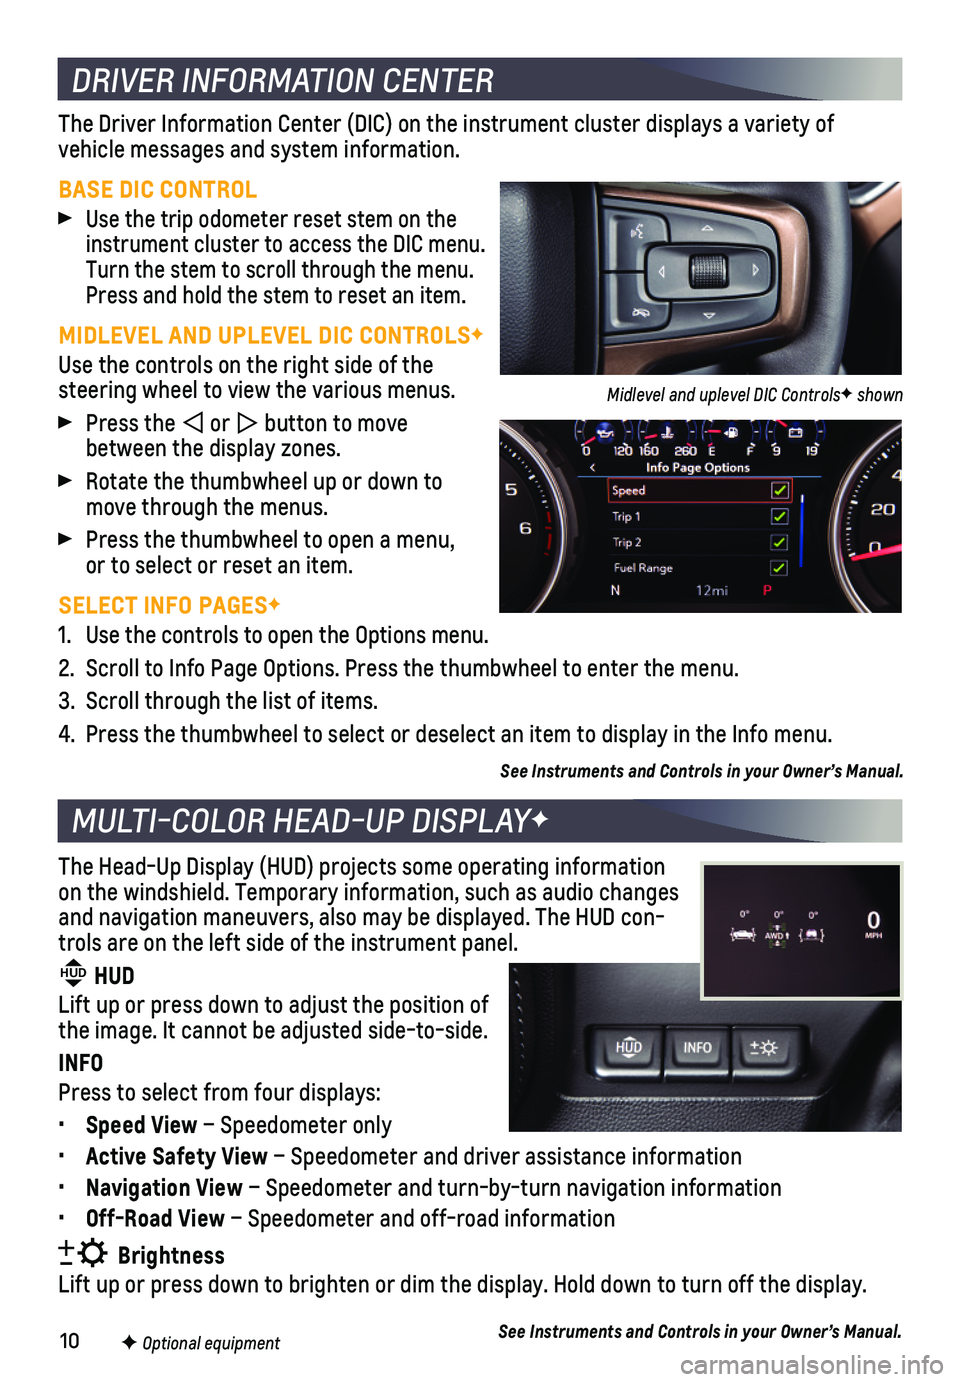 CHEVROLET SILVERADO 2020  Get To Know Guide 10F Optional equipment
DRIVER INFORMATION CENTER
MULTI-COLOR HEAD-UP DISPLAYF
The Driver Information Center (DIC) on the instrument cluster displays\
 a variety of  
vehicle messages and system inform